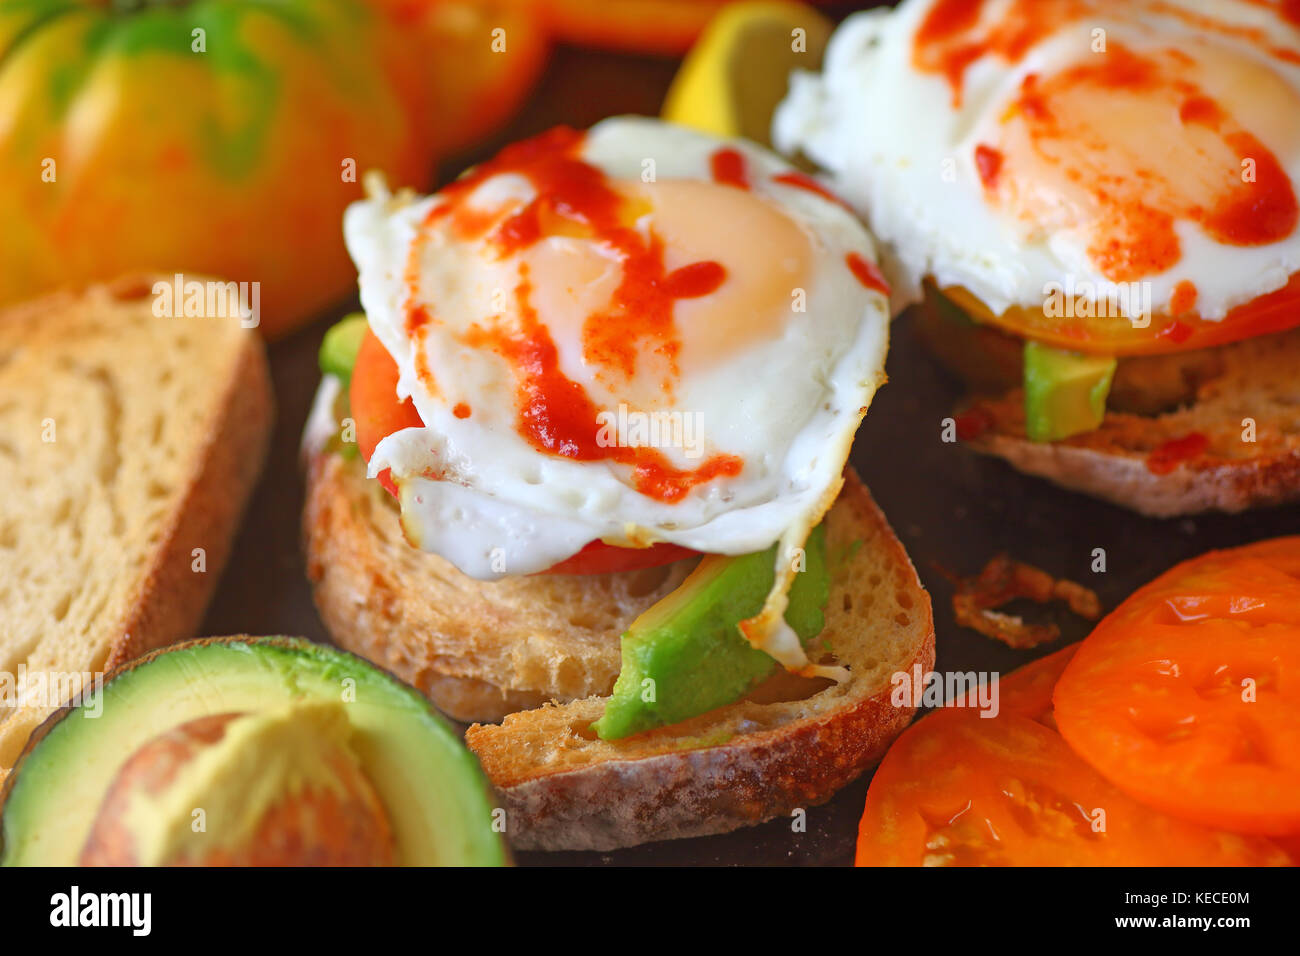 Fried eggs topped with hot chili sauce on avocado toast Stock Photo